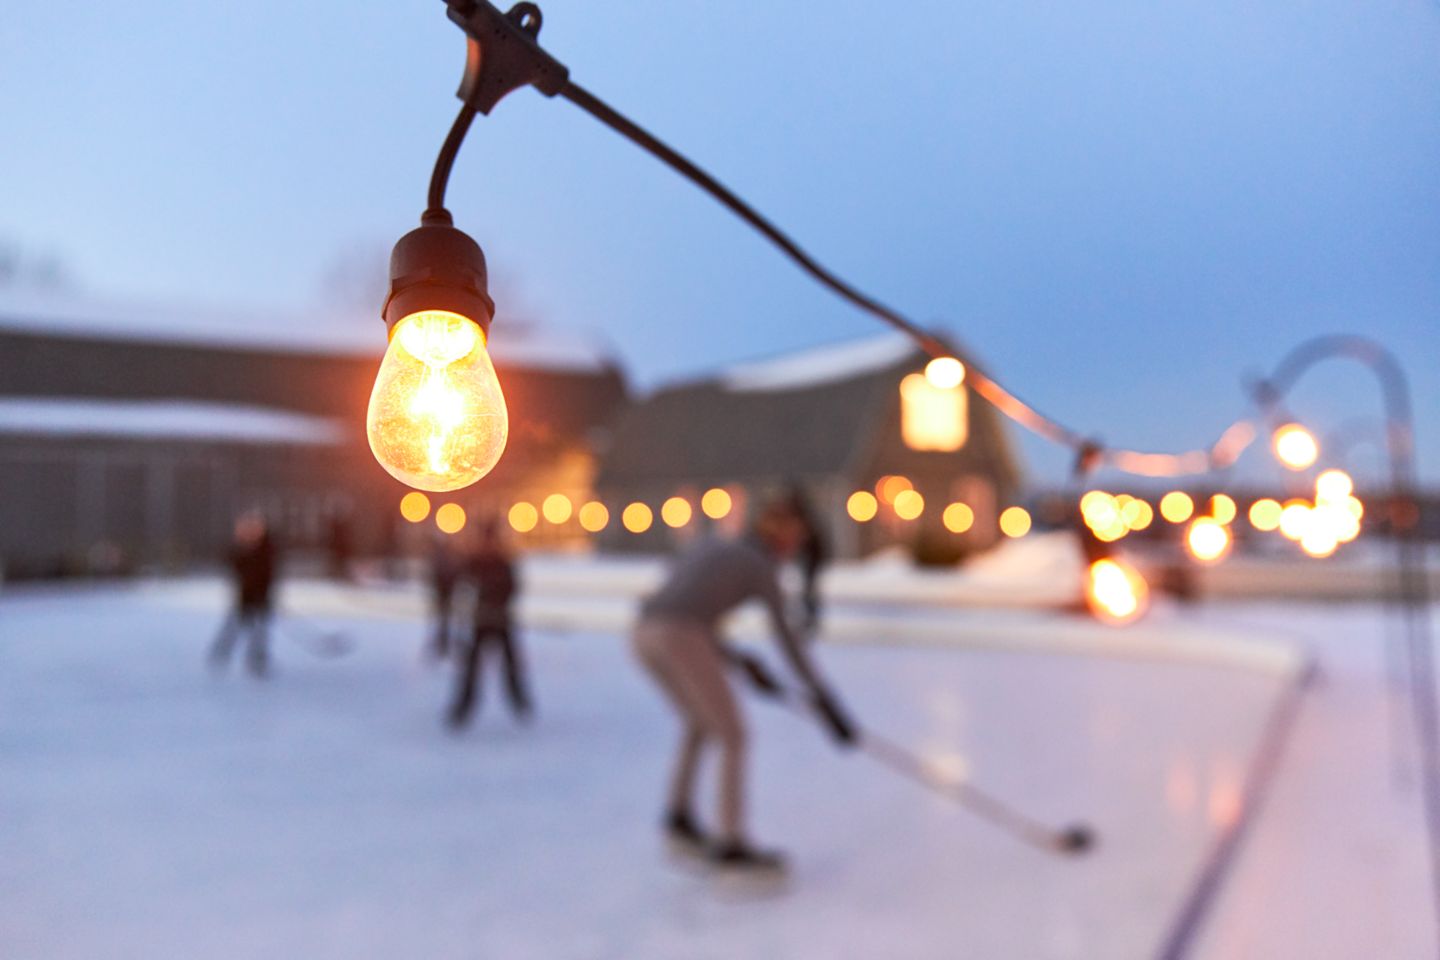 playing hockey under twinkle lights